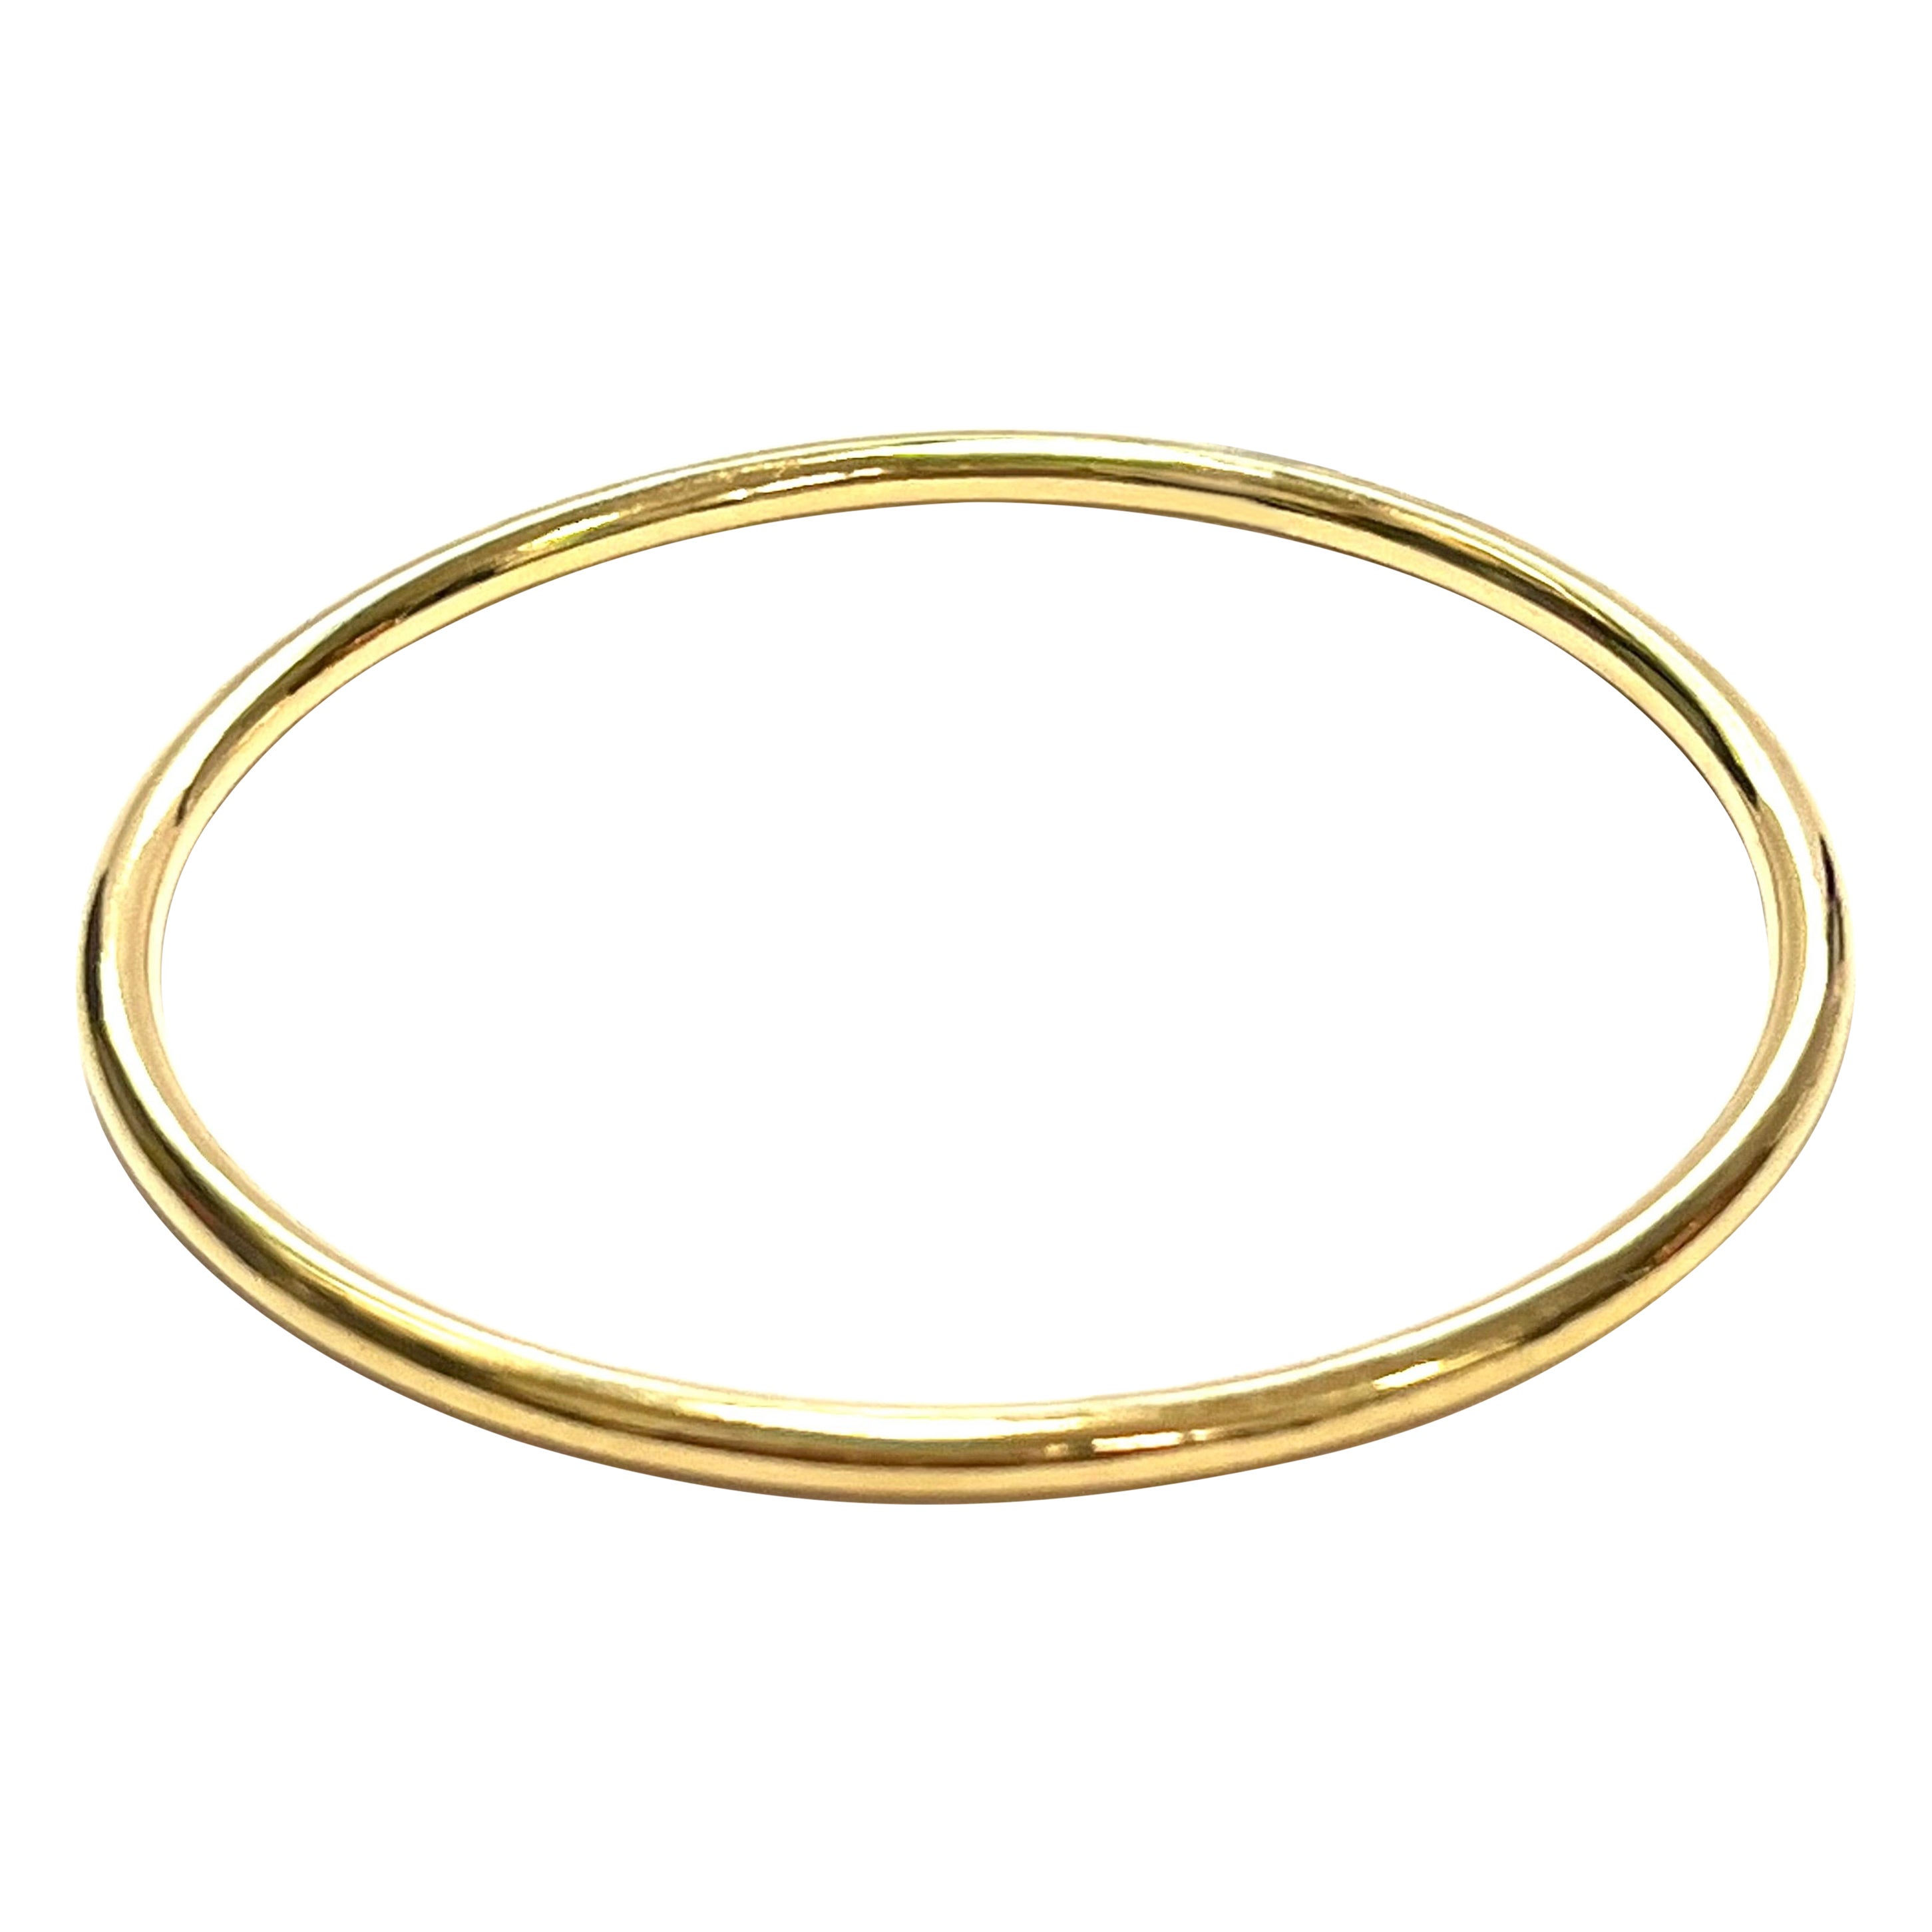 18 Karat Yellow Gold Slim Bangle from the "Essence" Collection